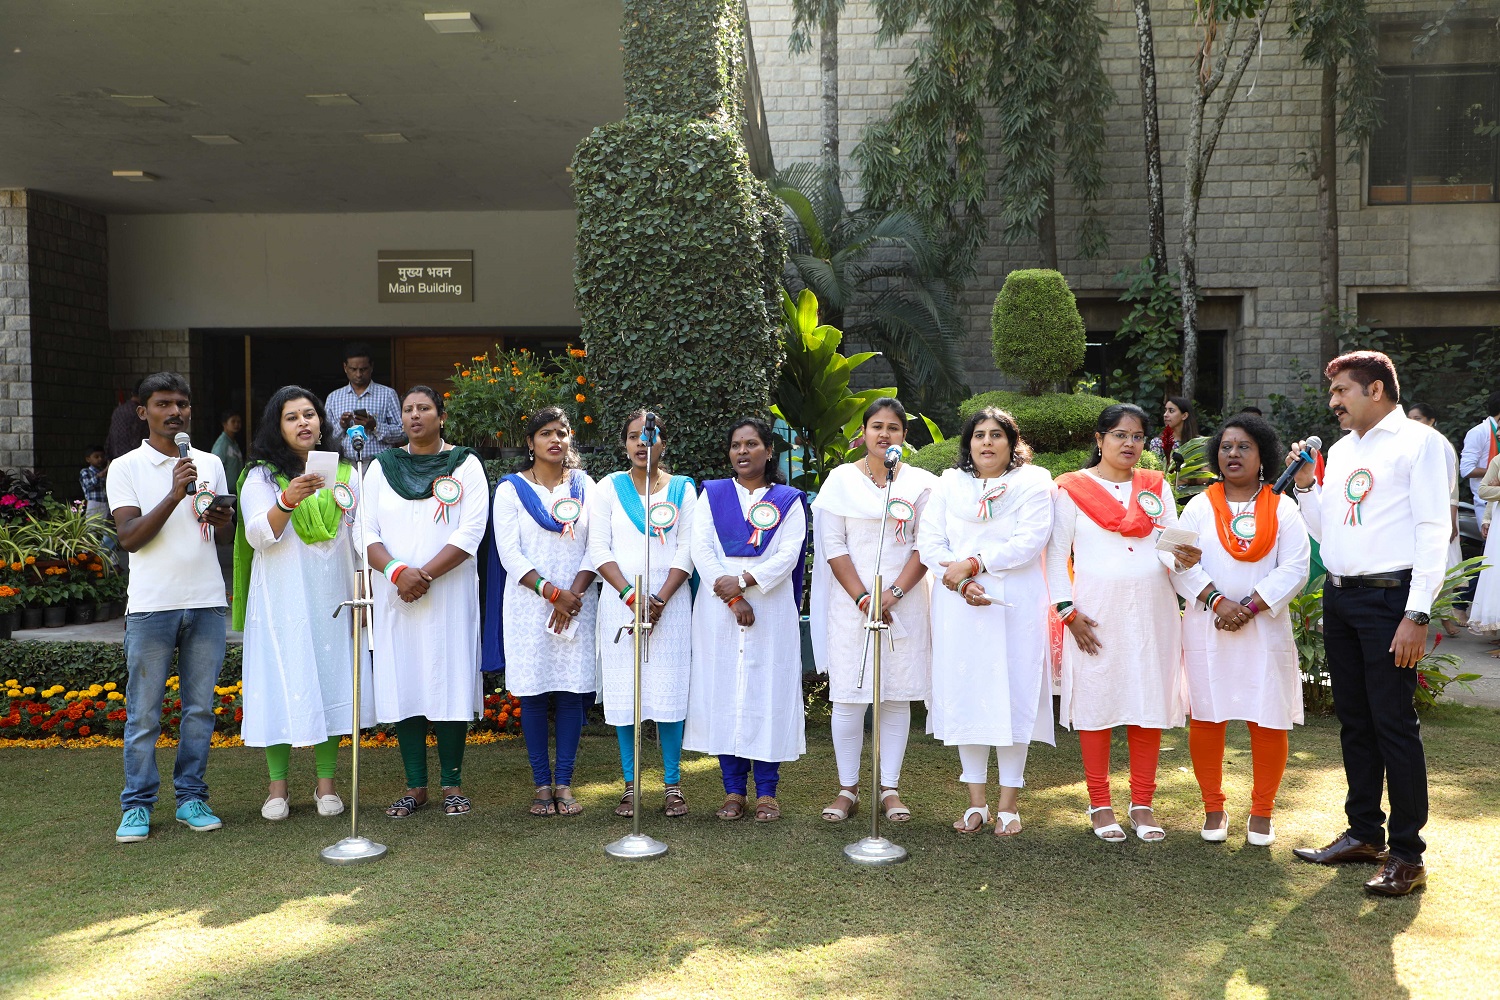 Staffs of IIMB sing a patriotic song on the Republic Day celebration.